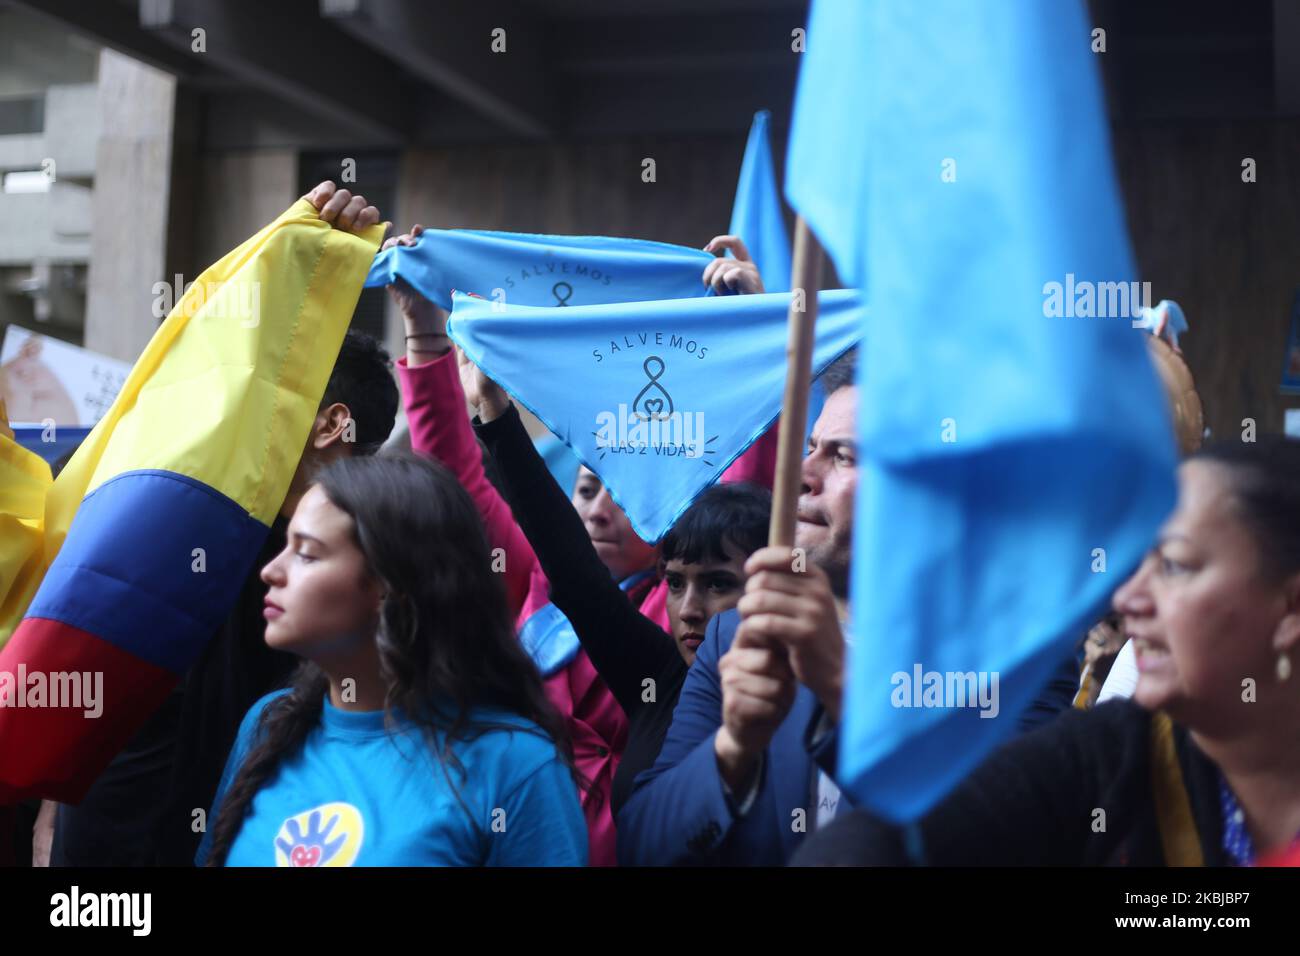 Anti-abortion activists protest in front of Colombia's Constitutional Court in Bogota city, Colombia, on March 2, 2020. Protests occurred during the debate due to the proposal of a magistrate to decriminalize abortion in the first 16 weeks of gestation and for 2 lawsuits that were requested to completely penalize this procedure. (Photo by Daniel Garzon Herazo/NurPhoto) Stock Photo